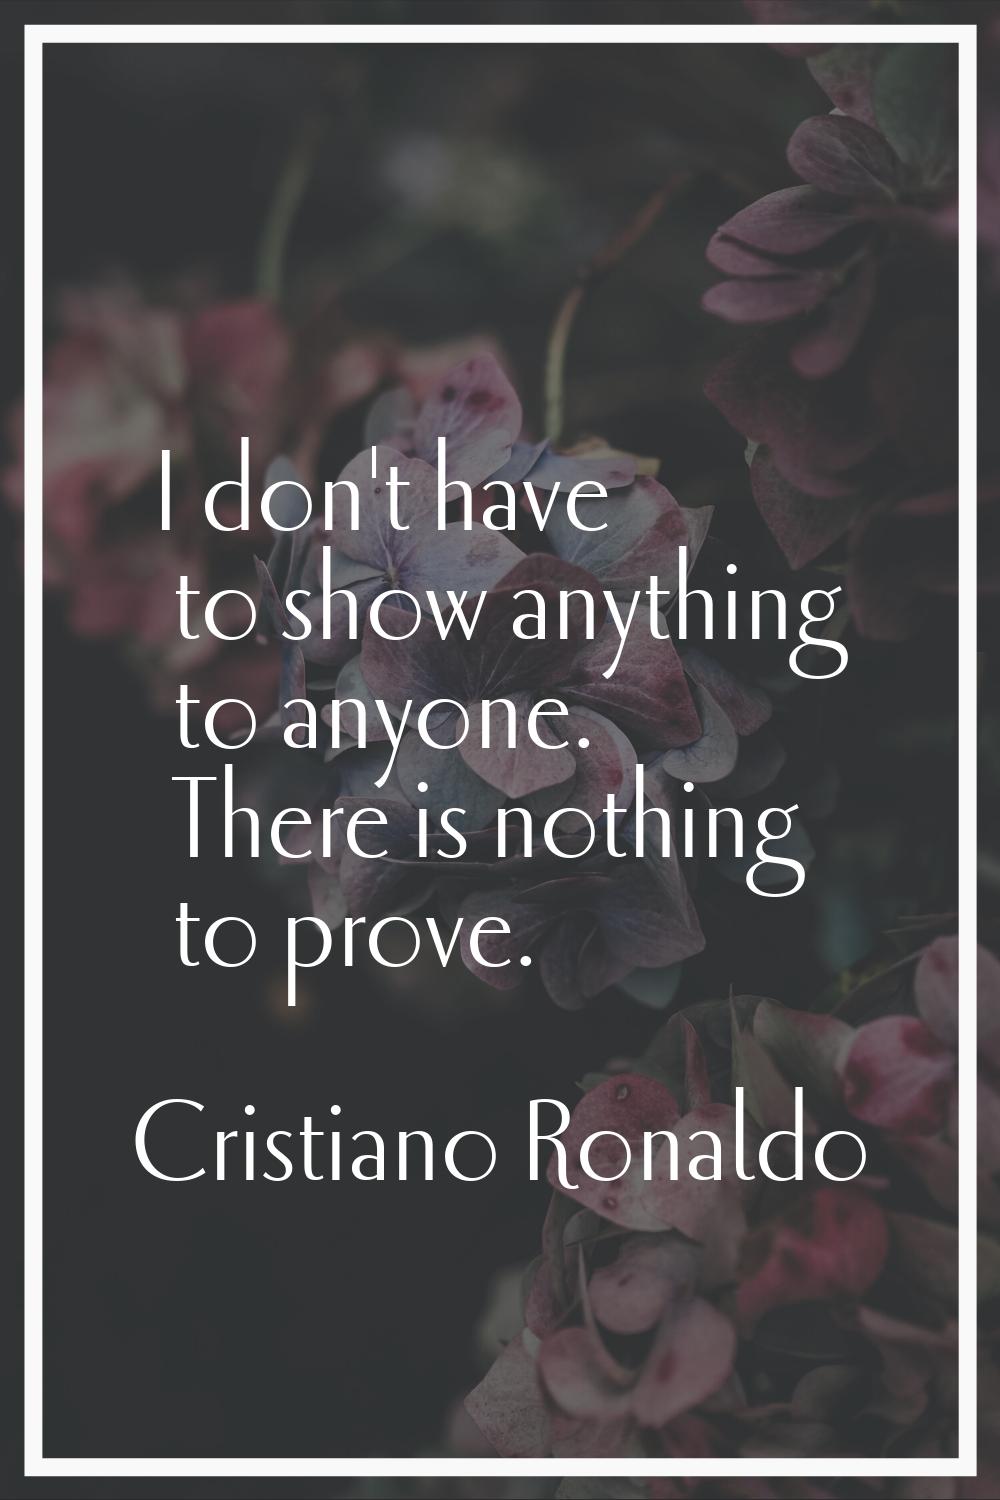 I don't have to show anything to anyone. There is nothing to prove.